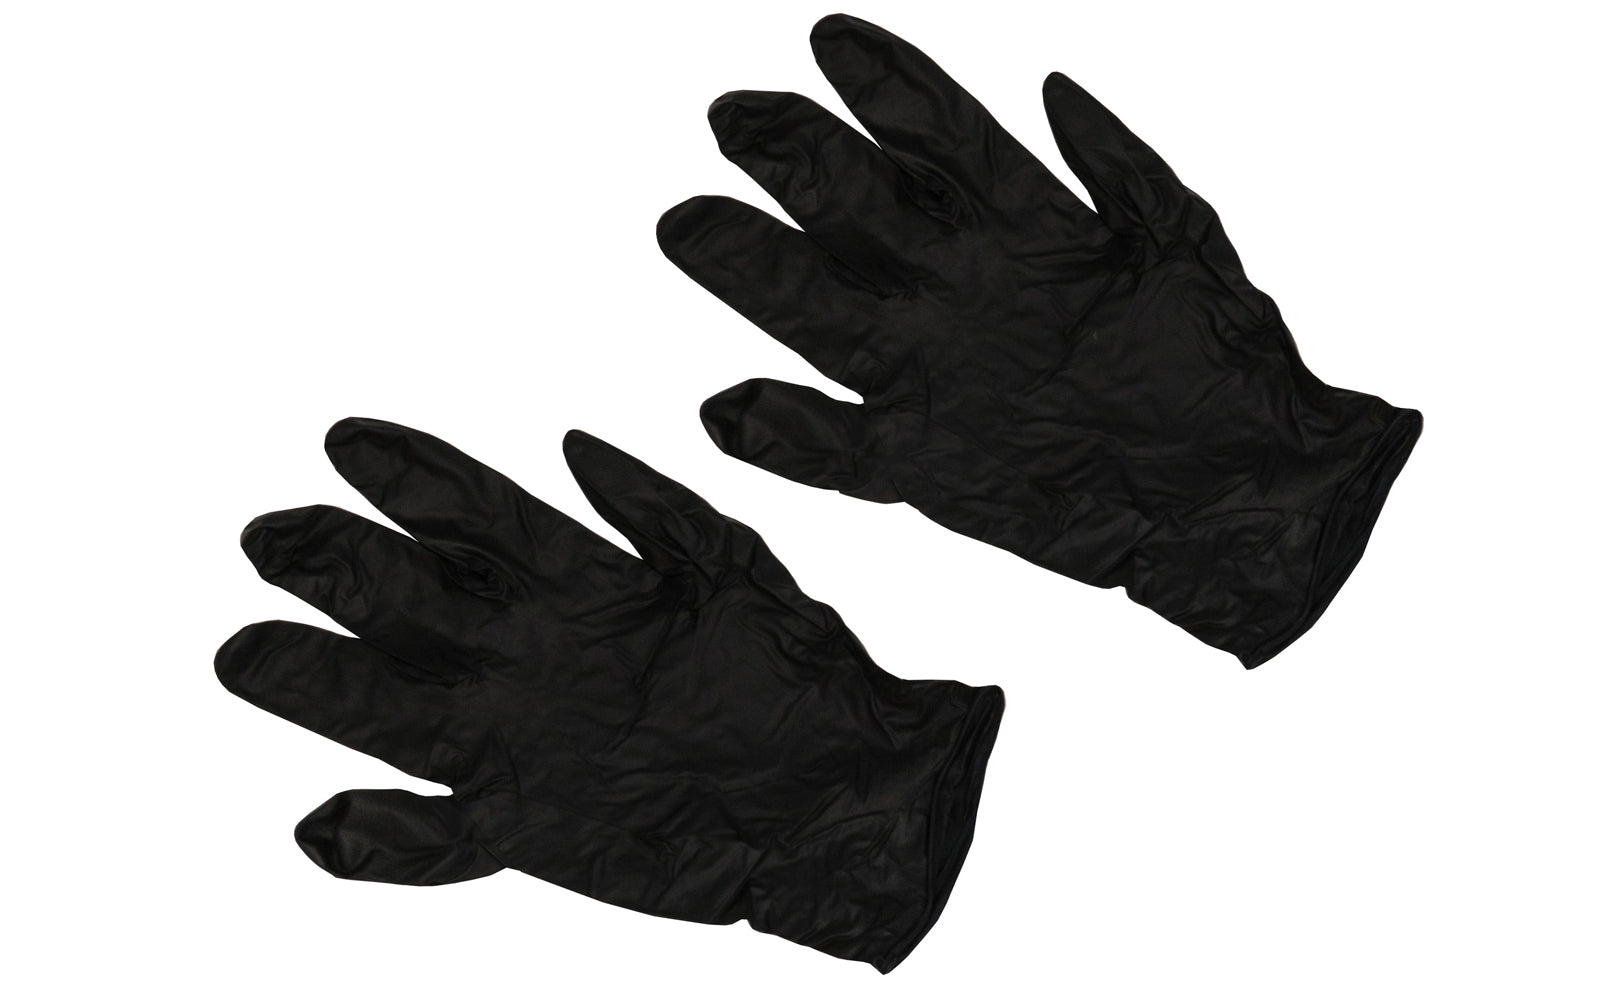 Powder free black Nitrile gloves are industrial grade gloves that have exceptional strength & durability. 5 Mil size. Good for automotive work, shop use, plumbing, manufacturing, security, law enforcement & transportation. Beaded cuff style. Not made with rubber latex. Ambidextrous design fits right or left hand